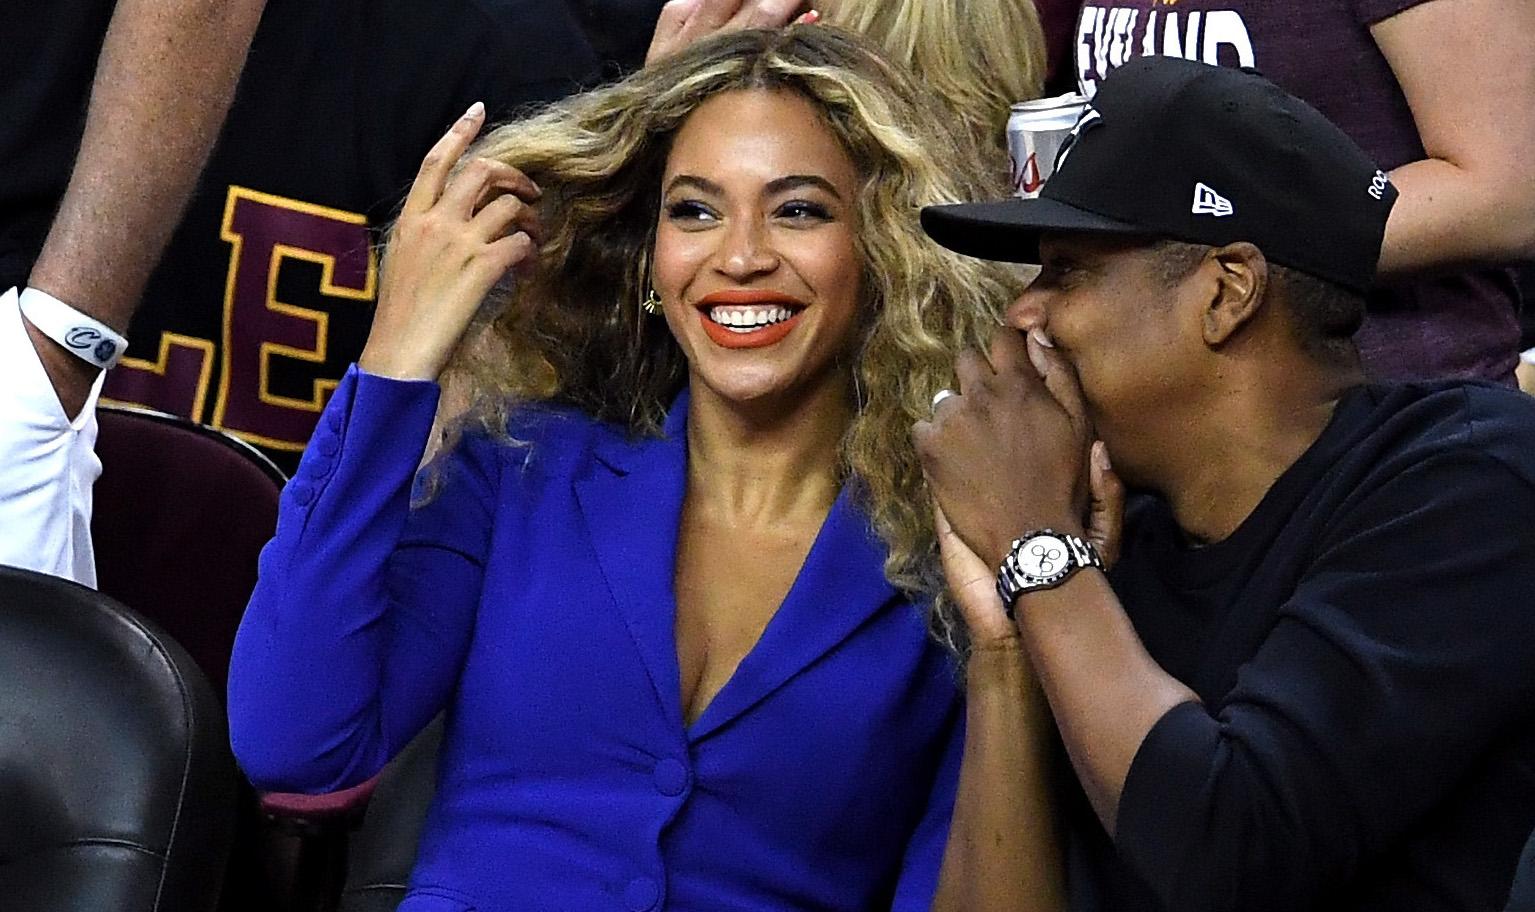 Beyoncé and Jay Z attend Game 6 of the 2016 NBA Finals between the Cleveland Cavaliers and the Golden State Warriors at Quicken Loans Arena on June 16, 2016 in Cleveland, Ohio.